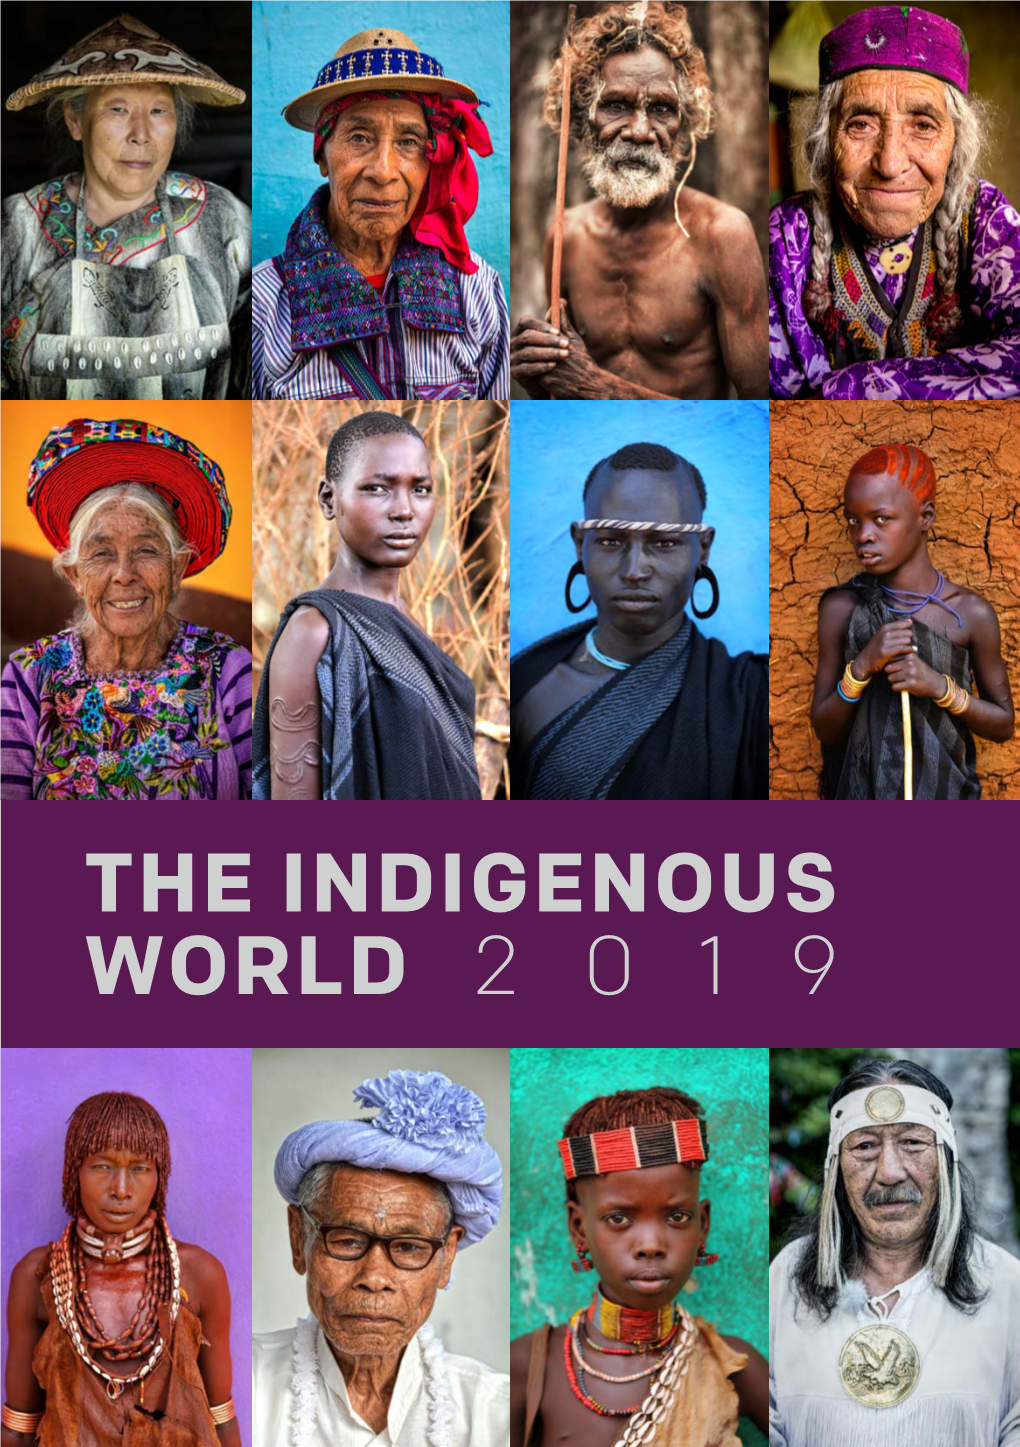 The Indigenous World 2 0